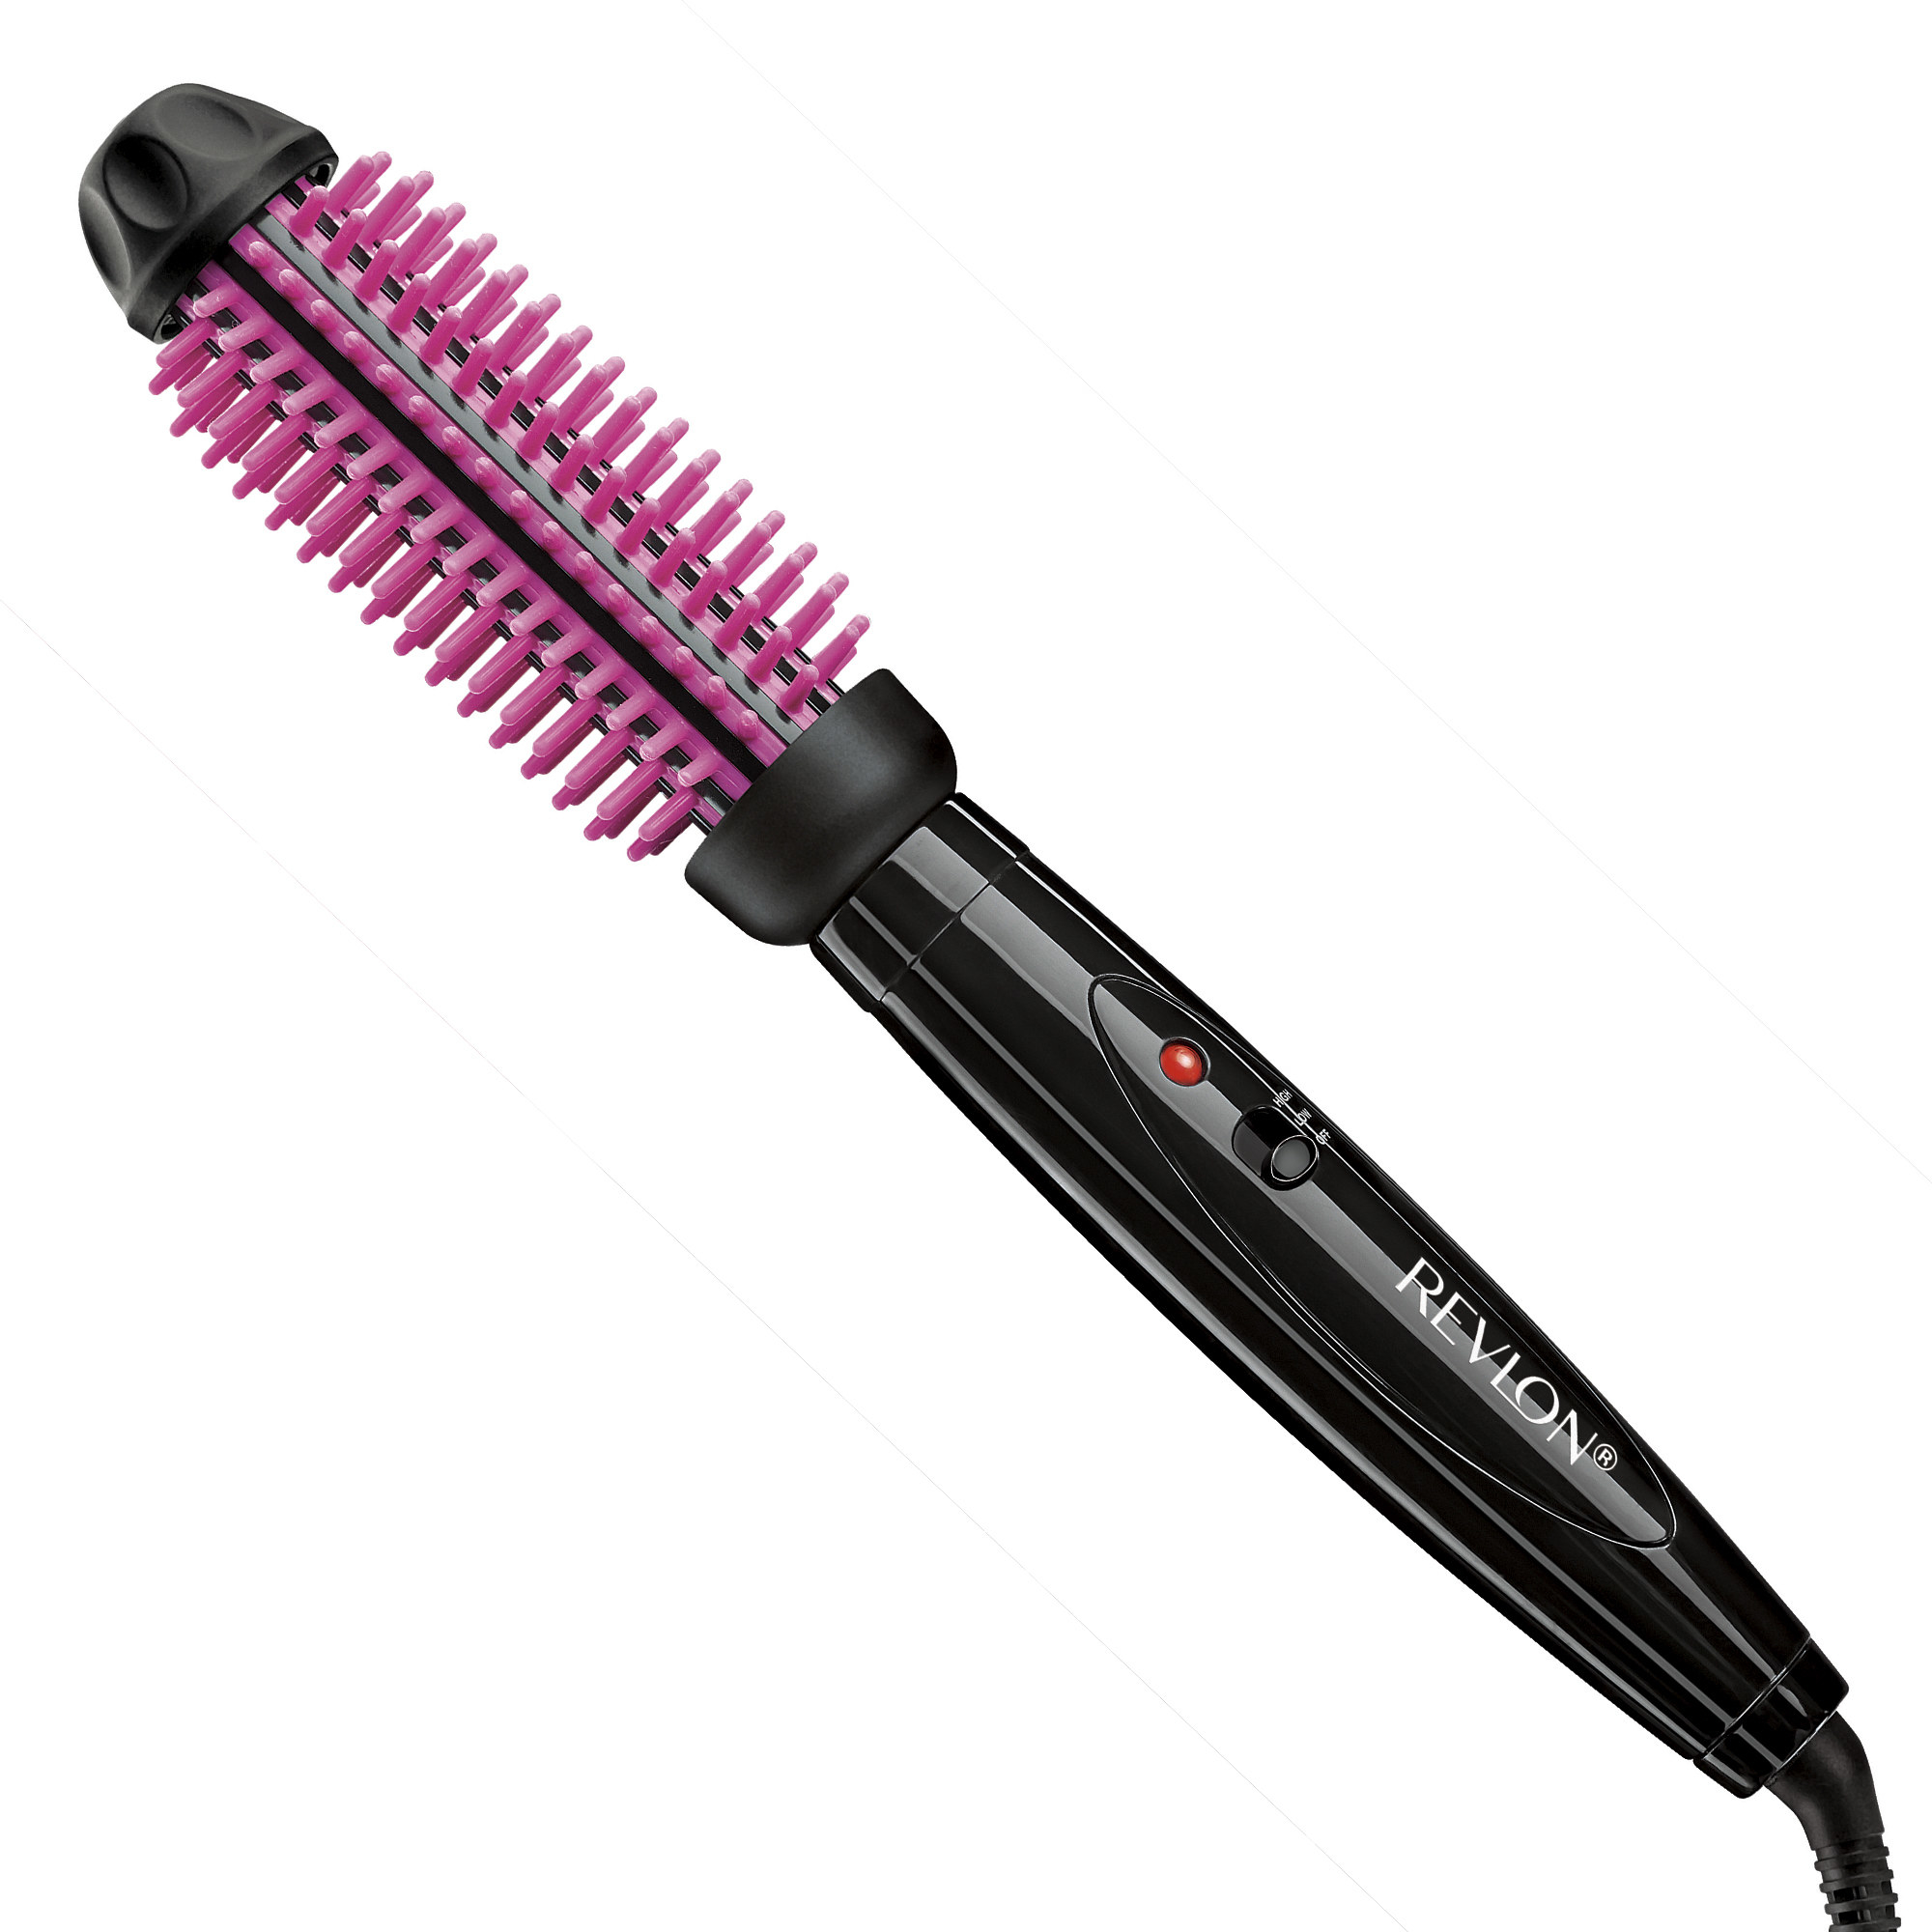 A heated curling brush